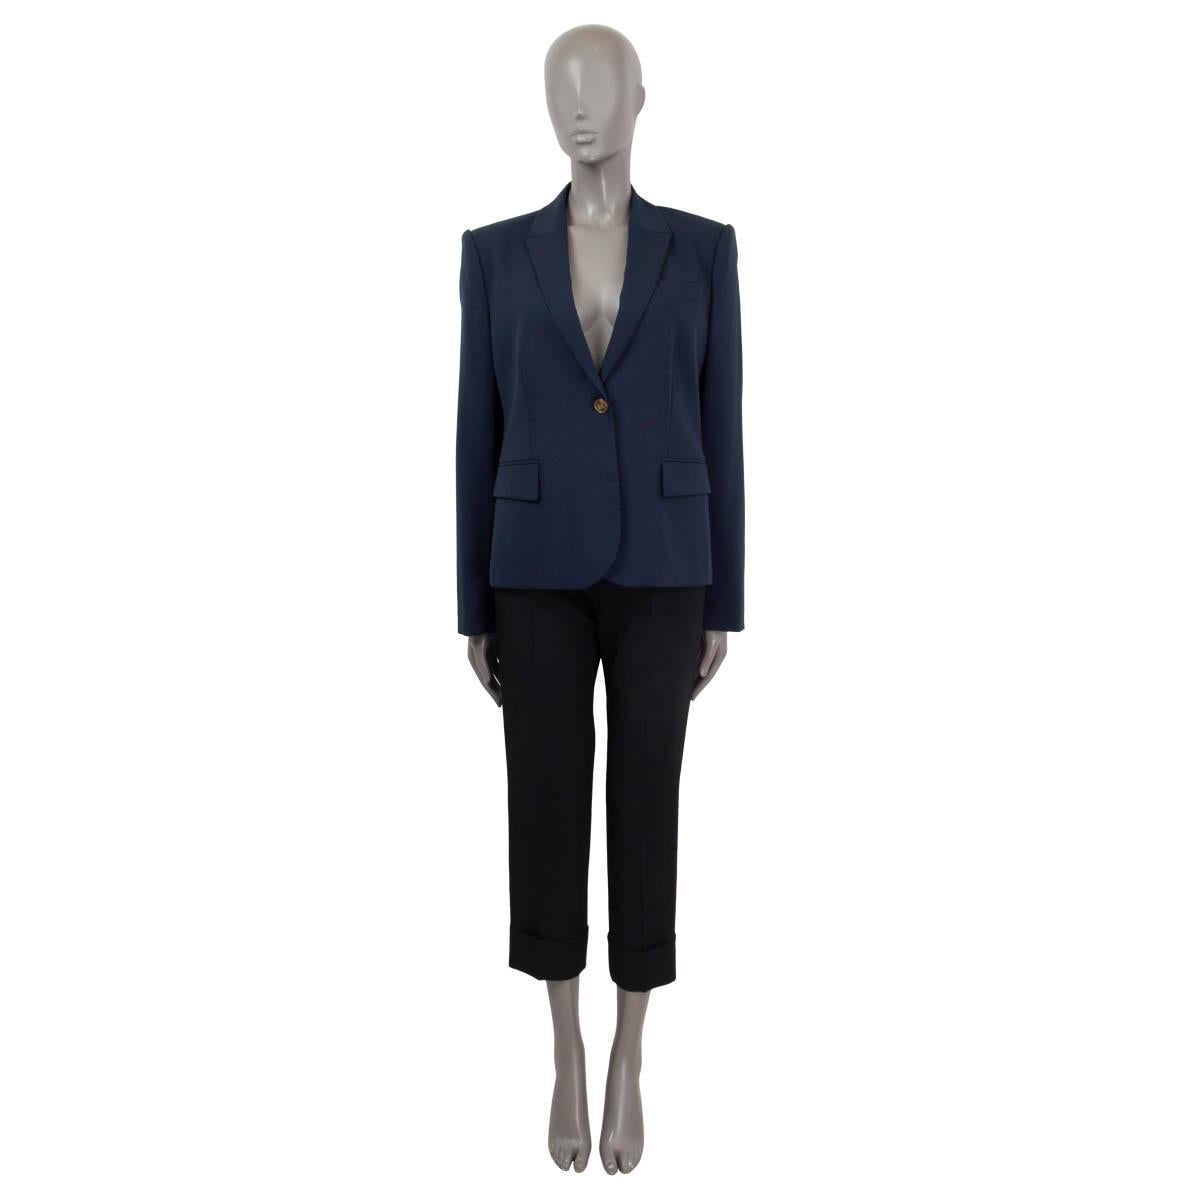 100% authentic Gucci long sleeve blazer in navy wool (97%) and elastane (3%). Features buttoned cuffs and two flap pockets on the front. Opens with one 'GG' button on the front. Lined in black viscose (75%) and polyester (25%). Has been worn and is